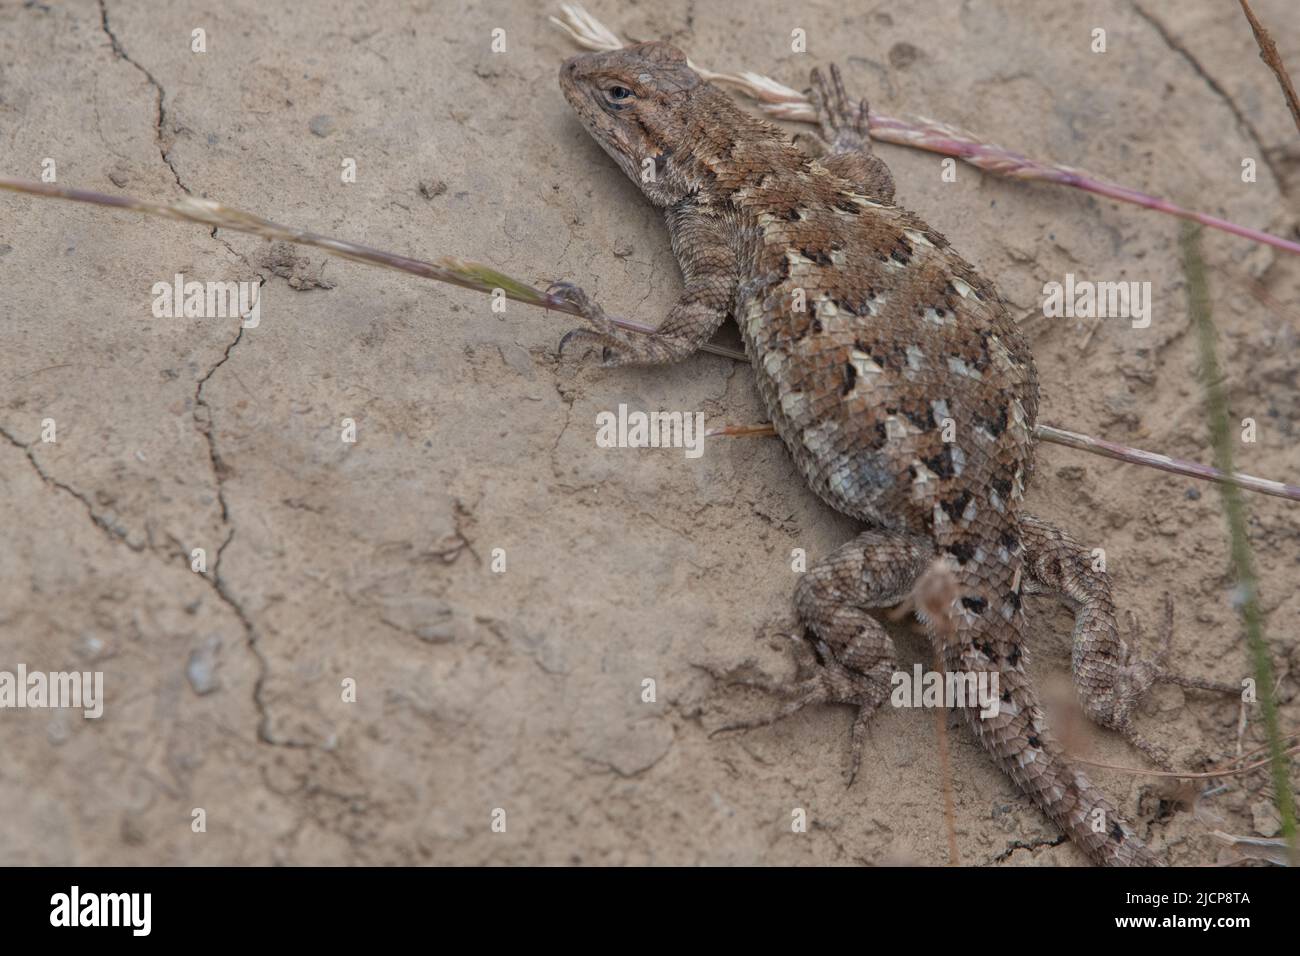 A gravid female western fence lizard (Sceloporus occidentalis) basking, she will soon lay her eggs. From the San Francisco bay region of California. Stock Photo